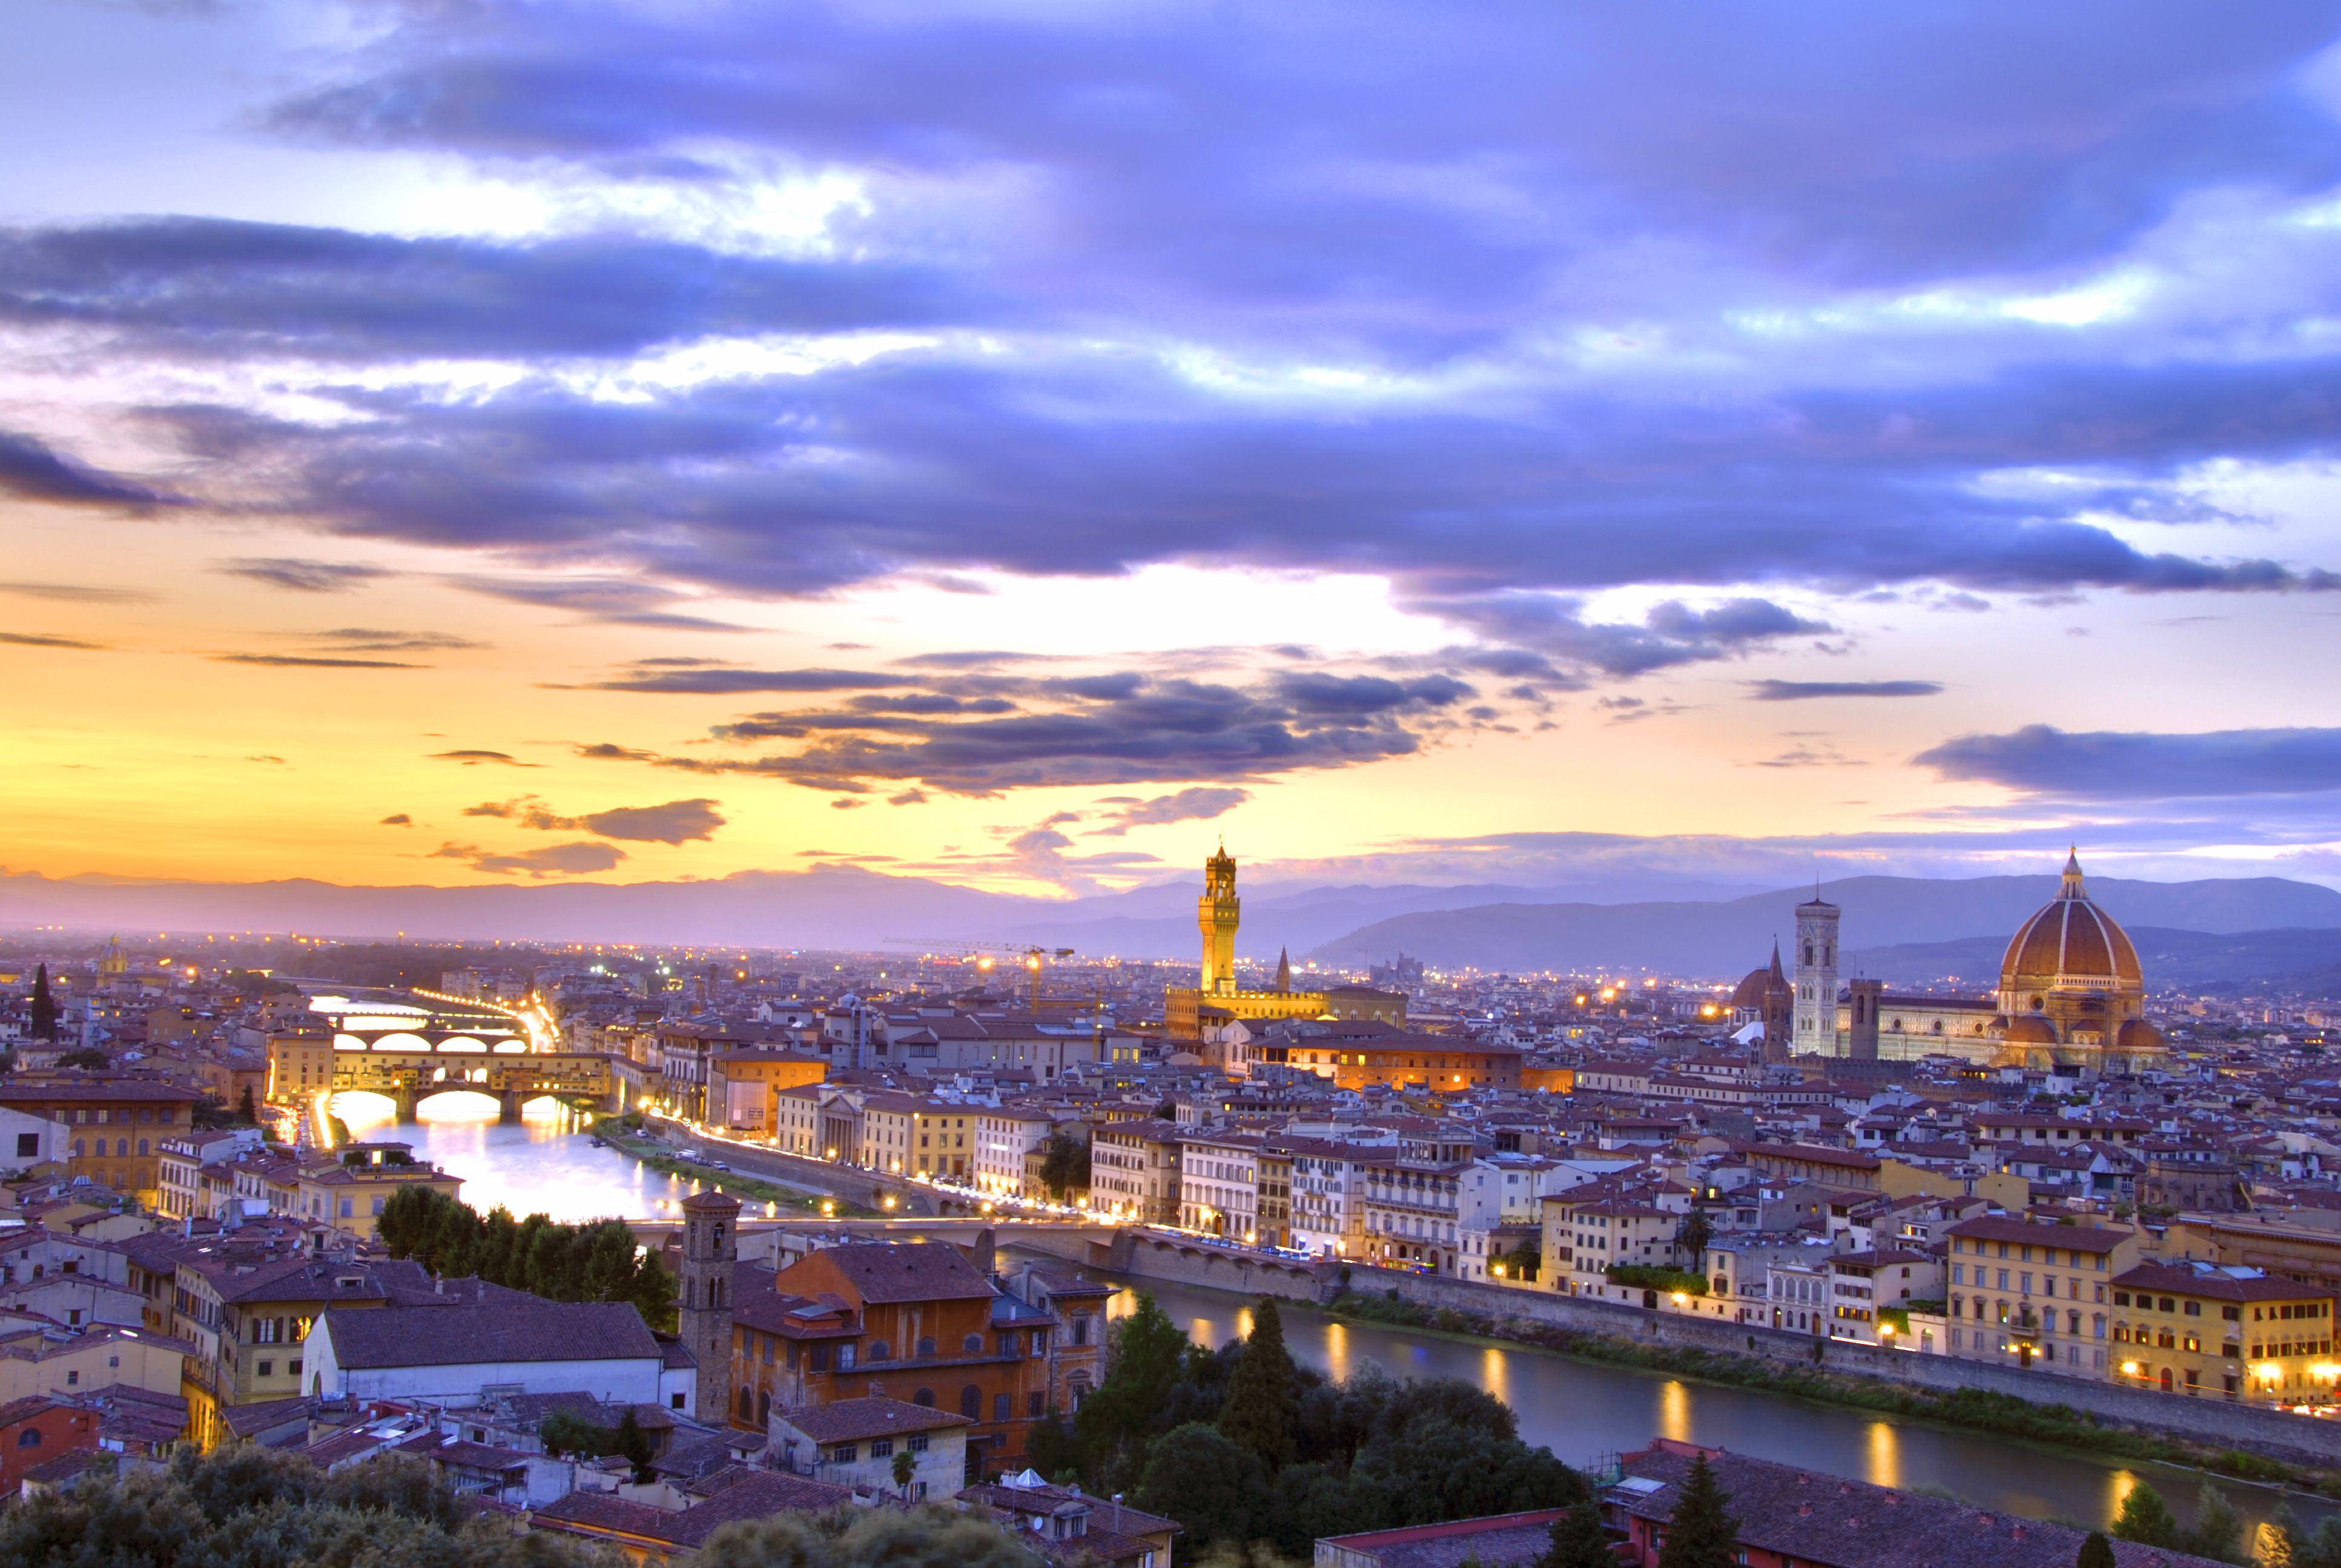 Beautiful sunset over river Arno in Florence, Italy, HDR